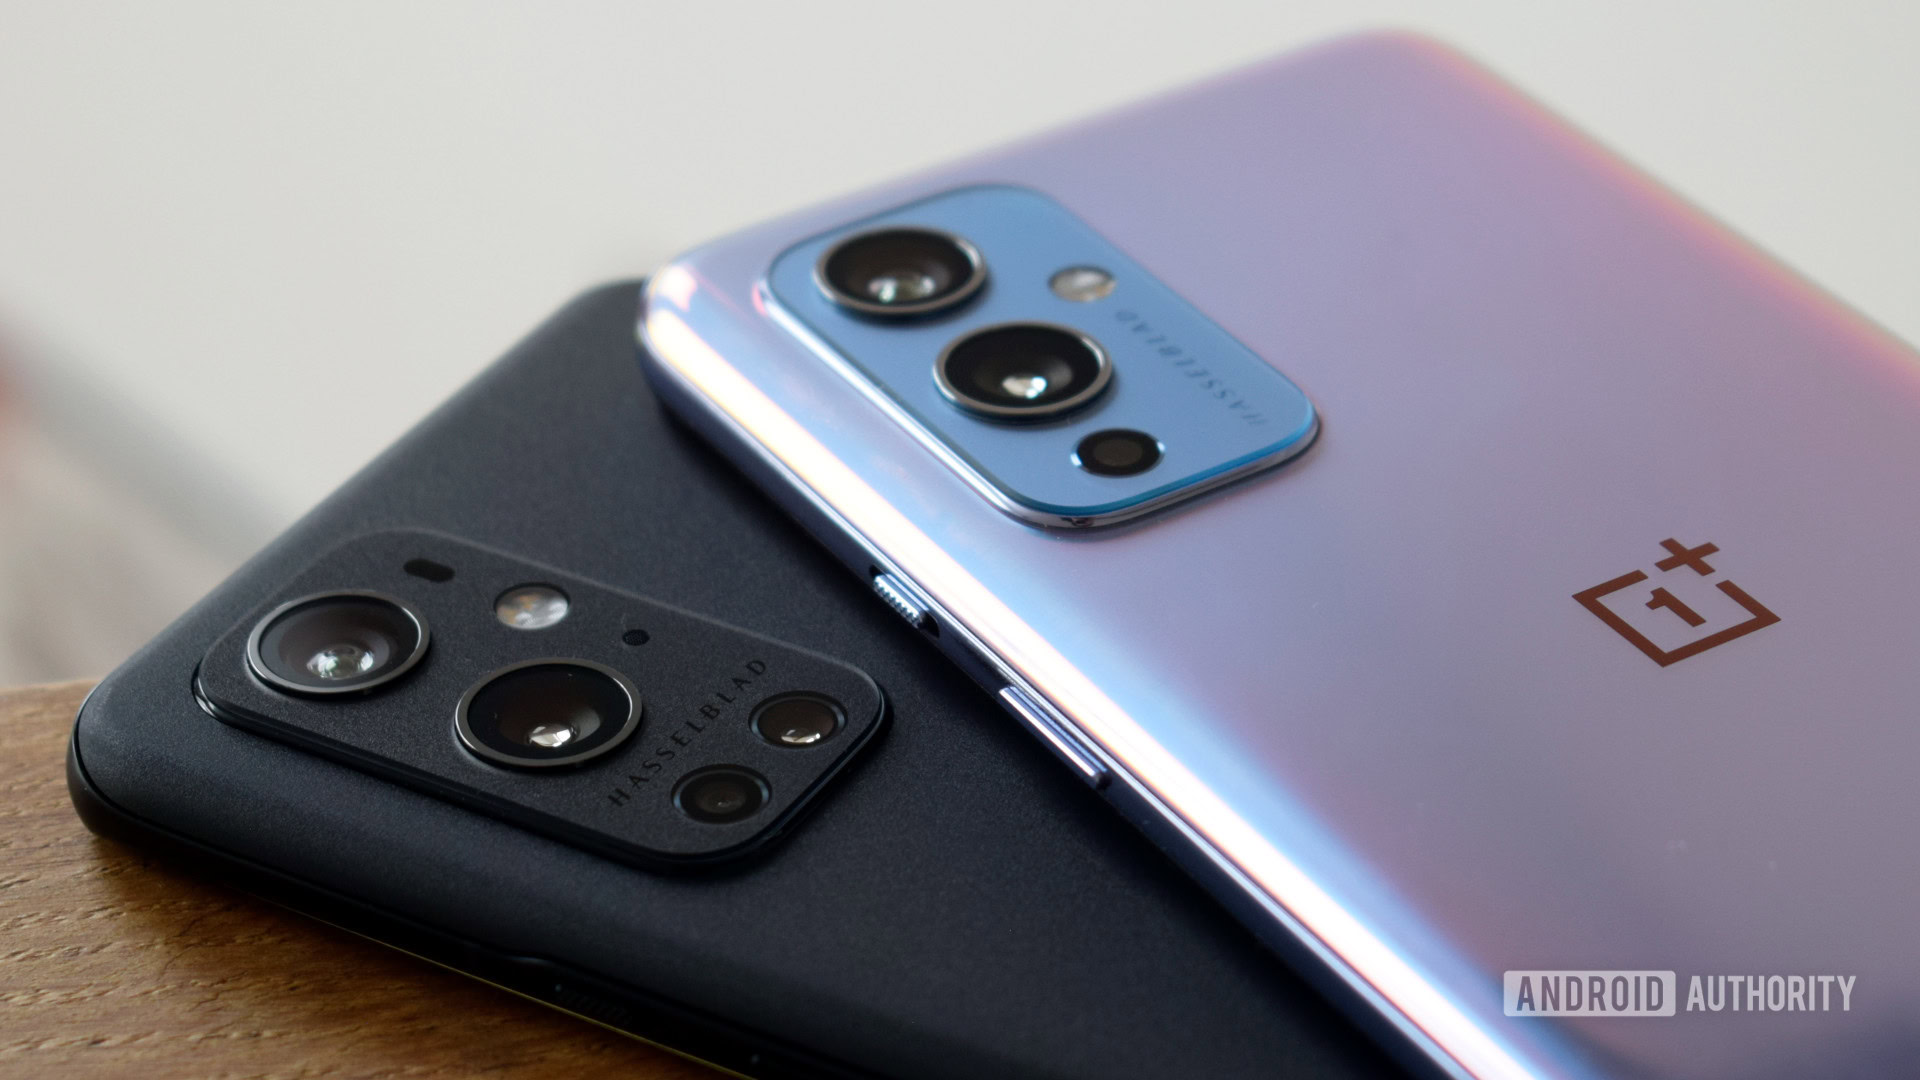 OnePlus 9 Pro and OnePlus 9 Snapdragon 888 phones